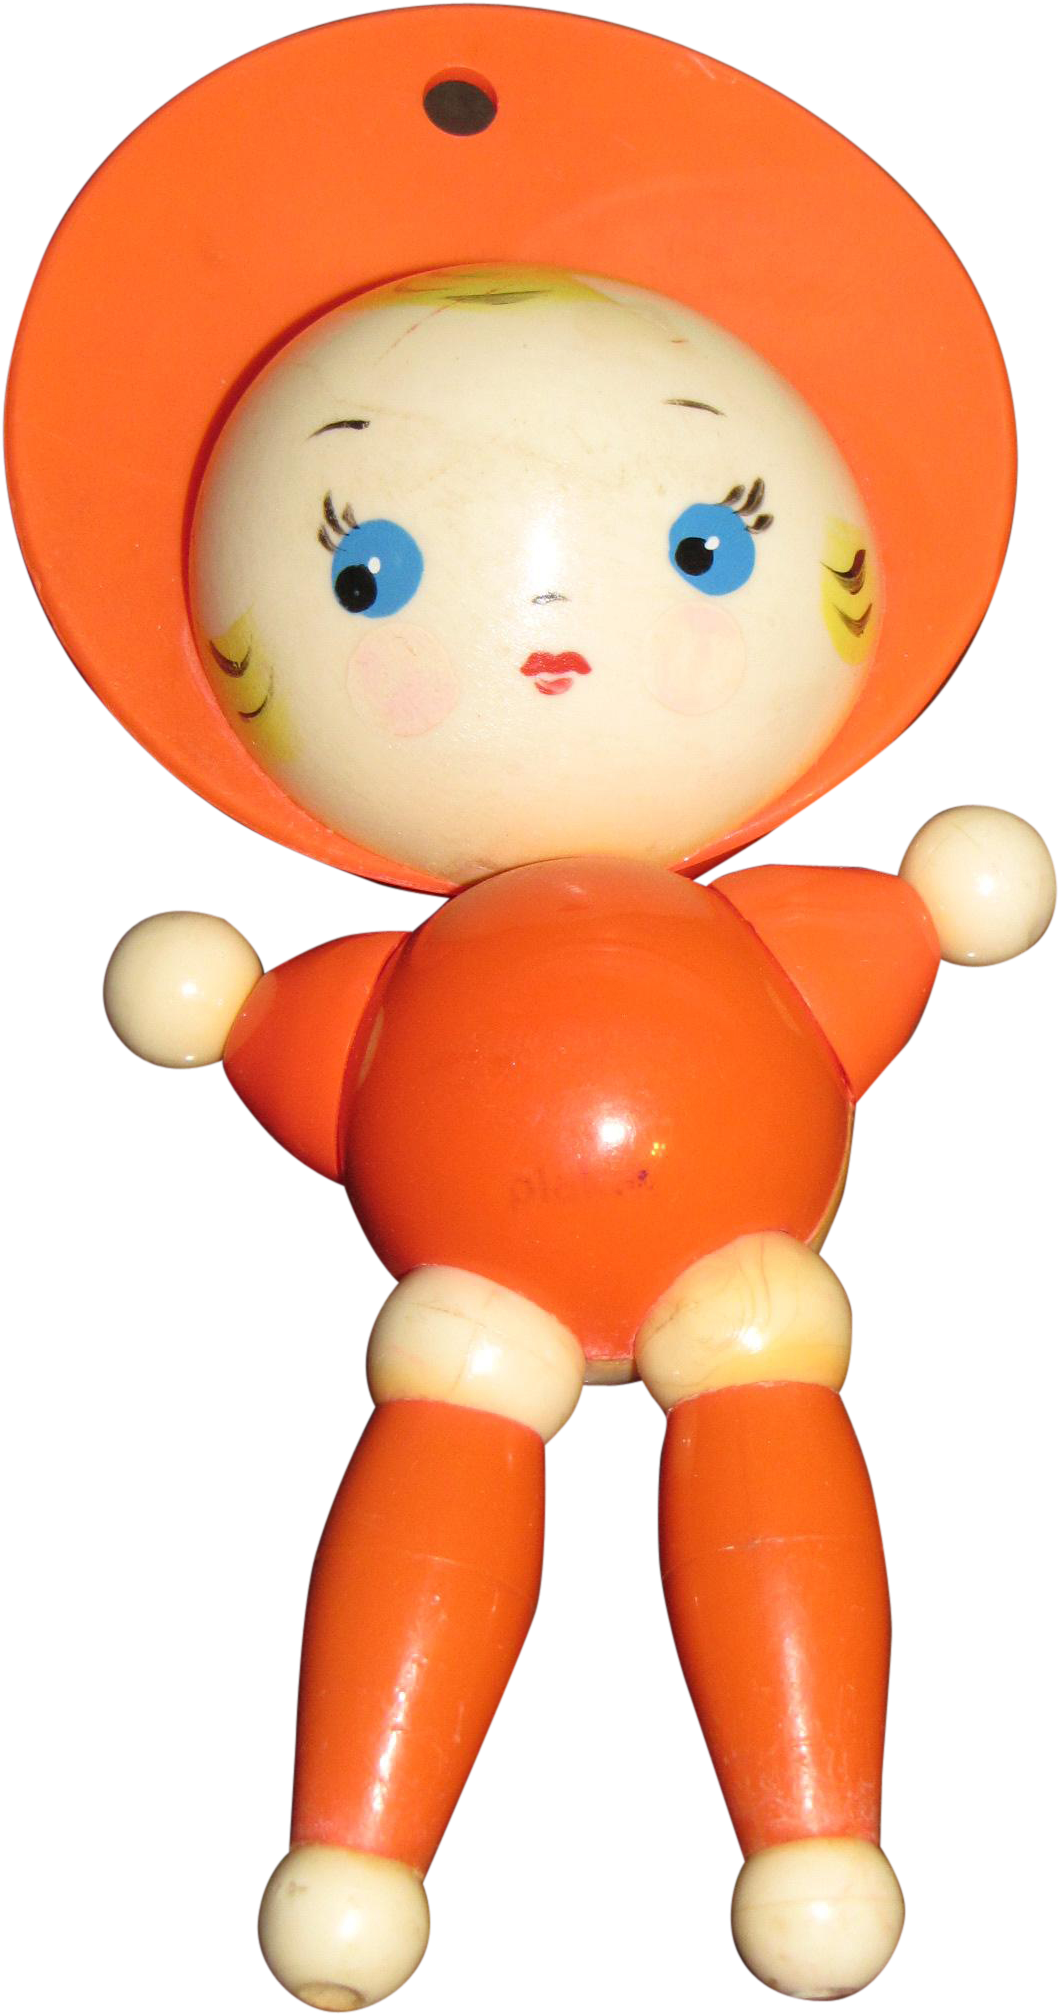 Vintage Baby Rattle - Doll (2013x2013)